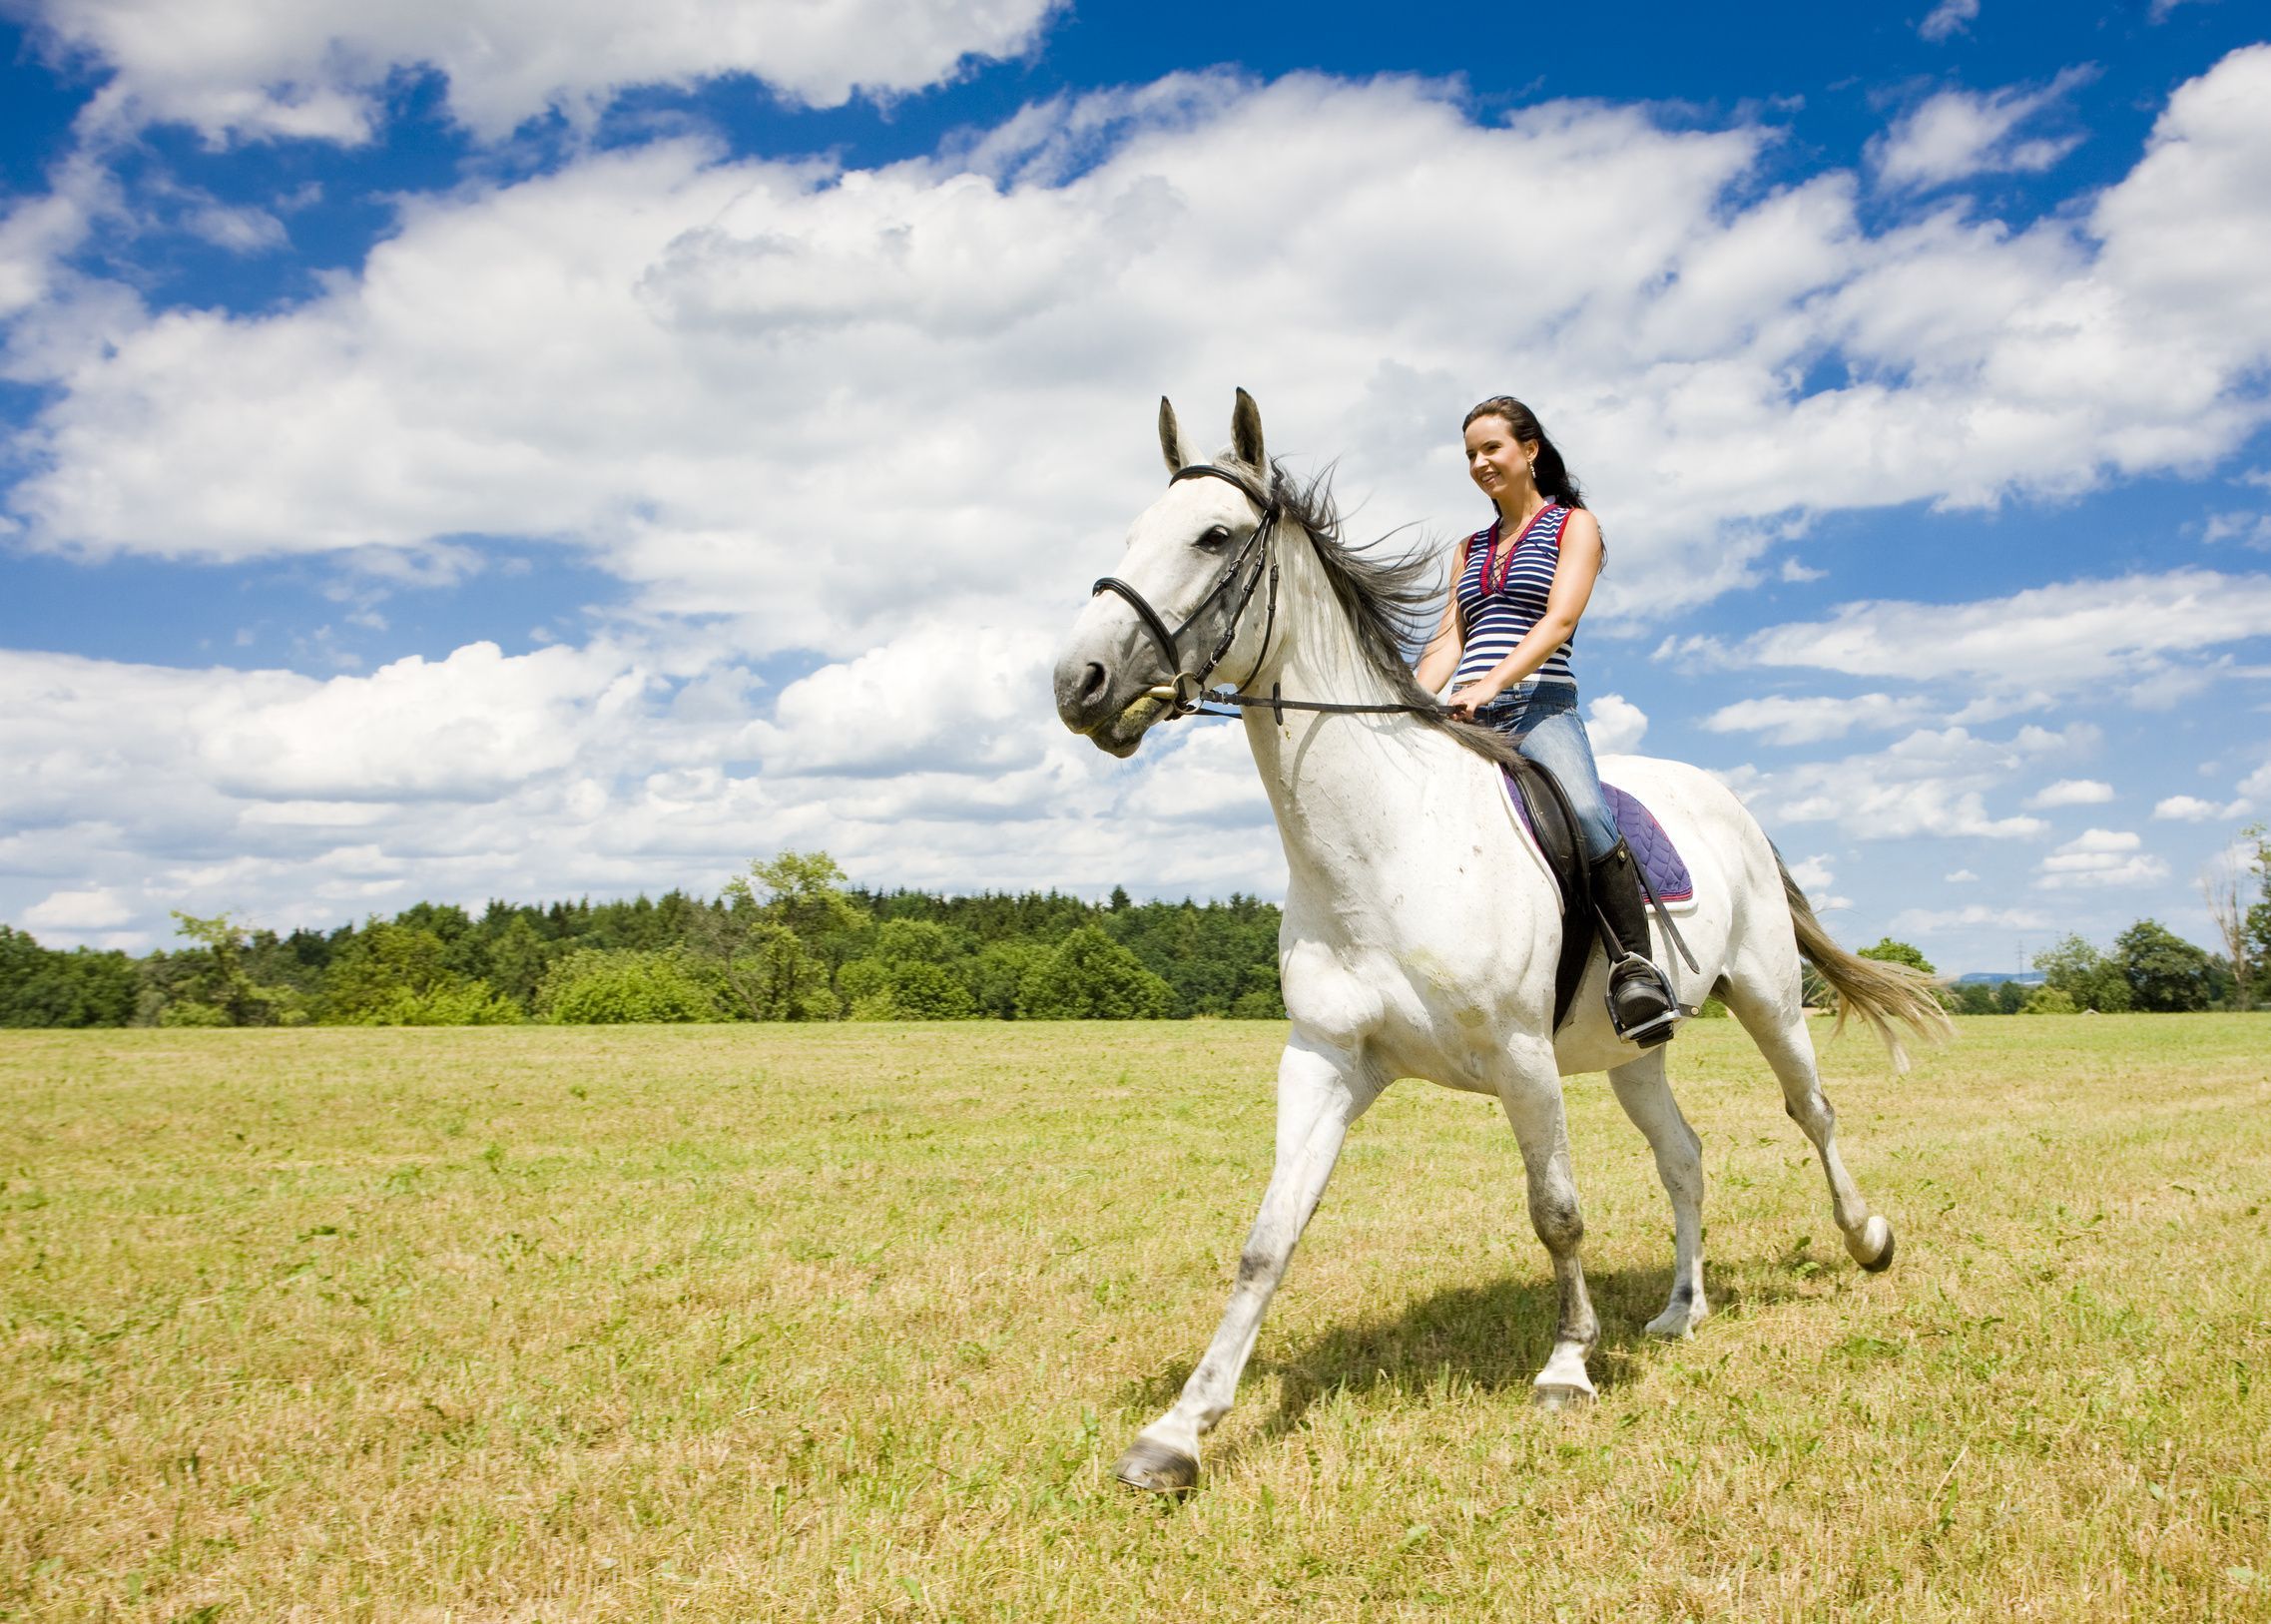 Horseback riding wallpapers and images - wallpapers, pictures, photos